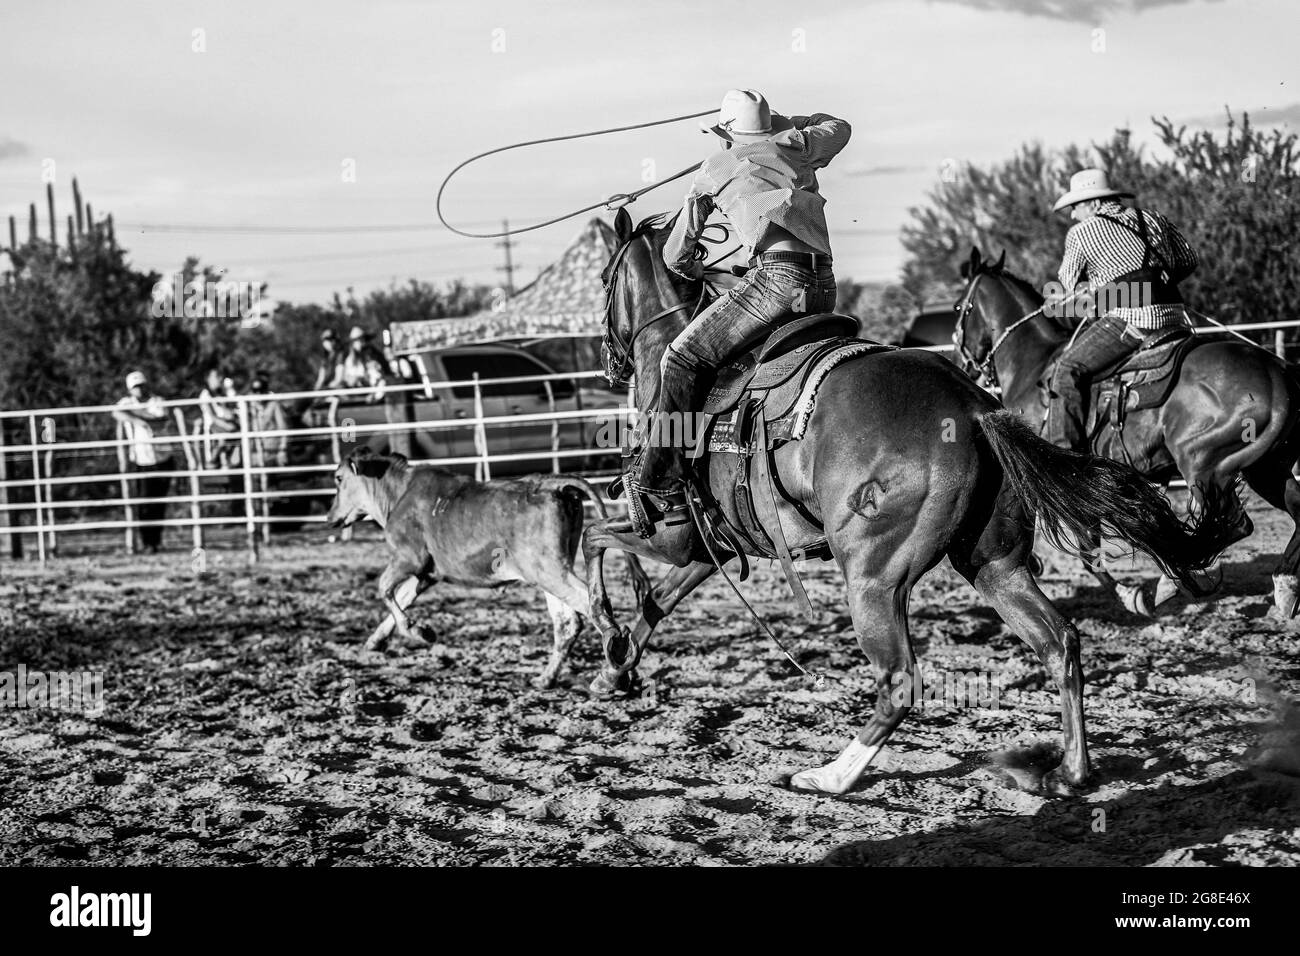 A rider or cowboy with his horse tries to make a lasso with a rope to a calf, heifer, during the rodeo circuit in the new arena El Shejon with the participation of the brands Corona Buckles, Sonora Saddlery and Cas Cov Rodeo on July 17, 2021 in Carbo, Mexico ..... (Photo: Luis Gutierrez / NortePhoto.com)   Un jinete o vaquero con su caballo intenta hacer un lazo con reata a un becerro, vaquilla, durante el circuito de rodeo en la nueva arena el Shejon con la participacion de la marcas Corona Buckles, Sonora Saddlery y Cas Cov Rodeo el 17 julio 2021 en Carbo, Mexico..... (Photo: Luis Gutierrez Stock Photo